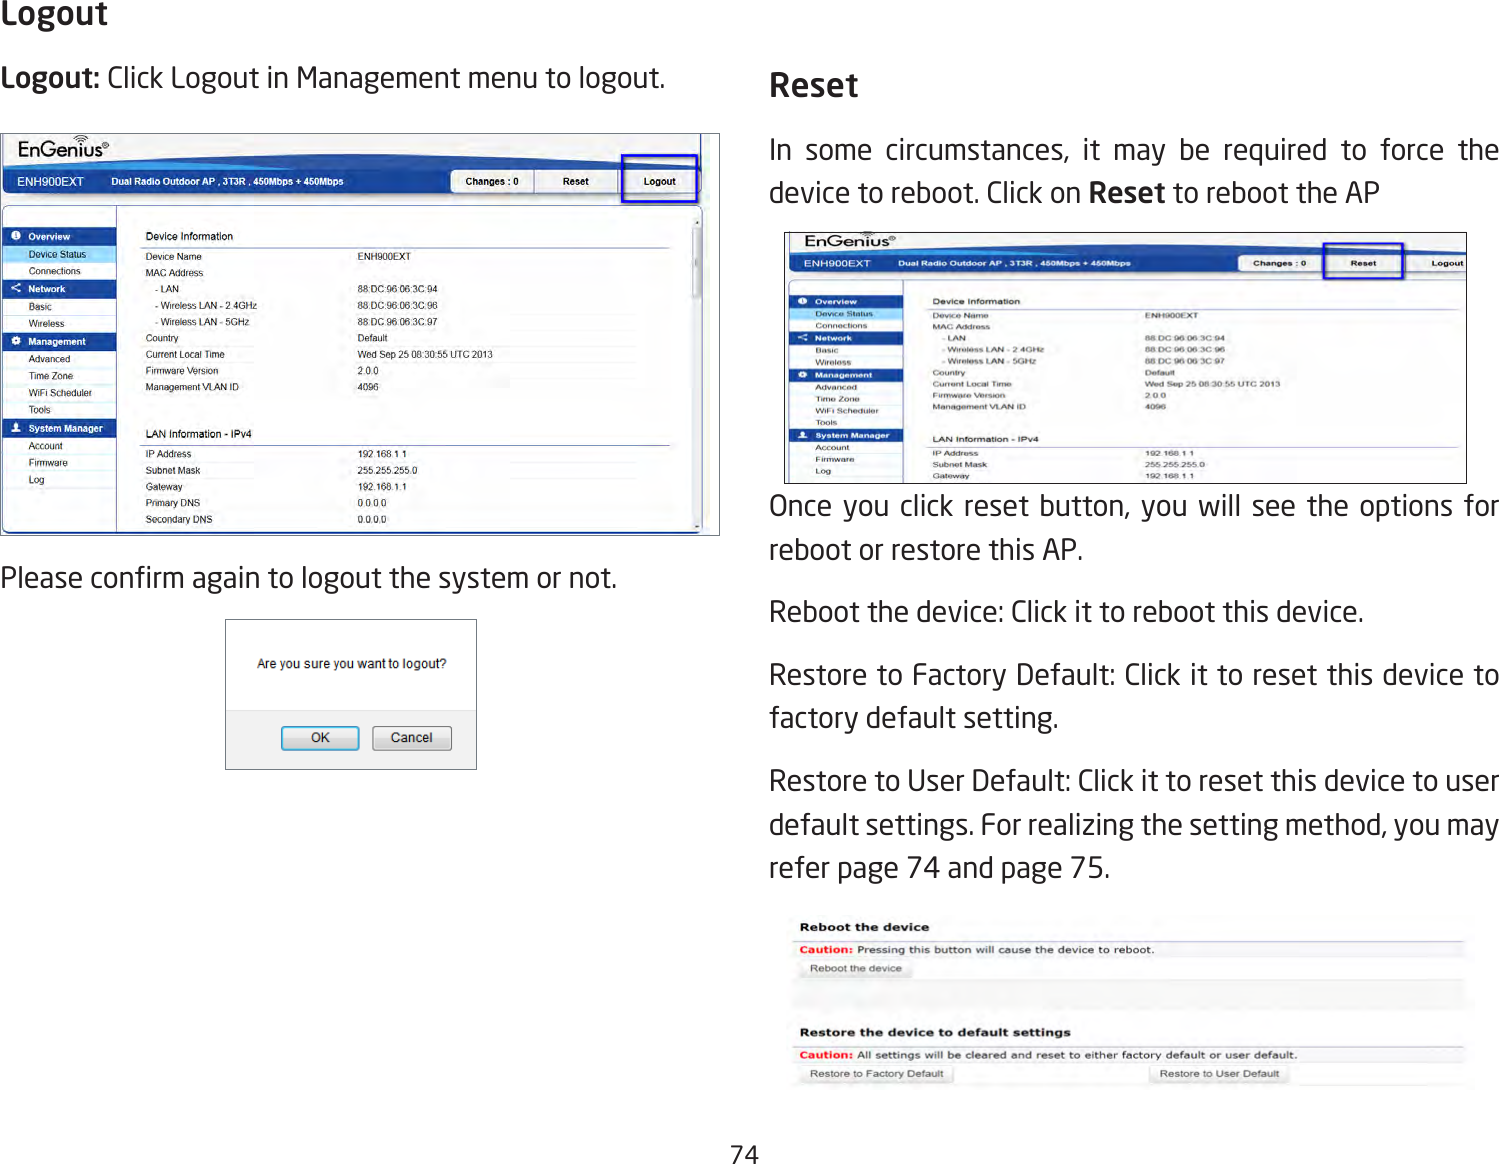 74LogoutLogout: Click Logout in Management menu to logout.Please conrm again to logout the system or not.ResetIn some circumstances, it may be required to force the device to reboot. Click on Reset to reboot the APOnce you click reset button, you will see the options for reboot or restore this AP.Reboot the device: Click it to reboot this device.Restore to Factory Default: Click it to reset this device to factory default setting. Restore to User Default: Click it to reset this device to user default settings. For realizing the setting method, you may refer page 74 and page 75.